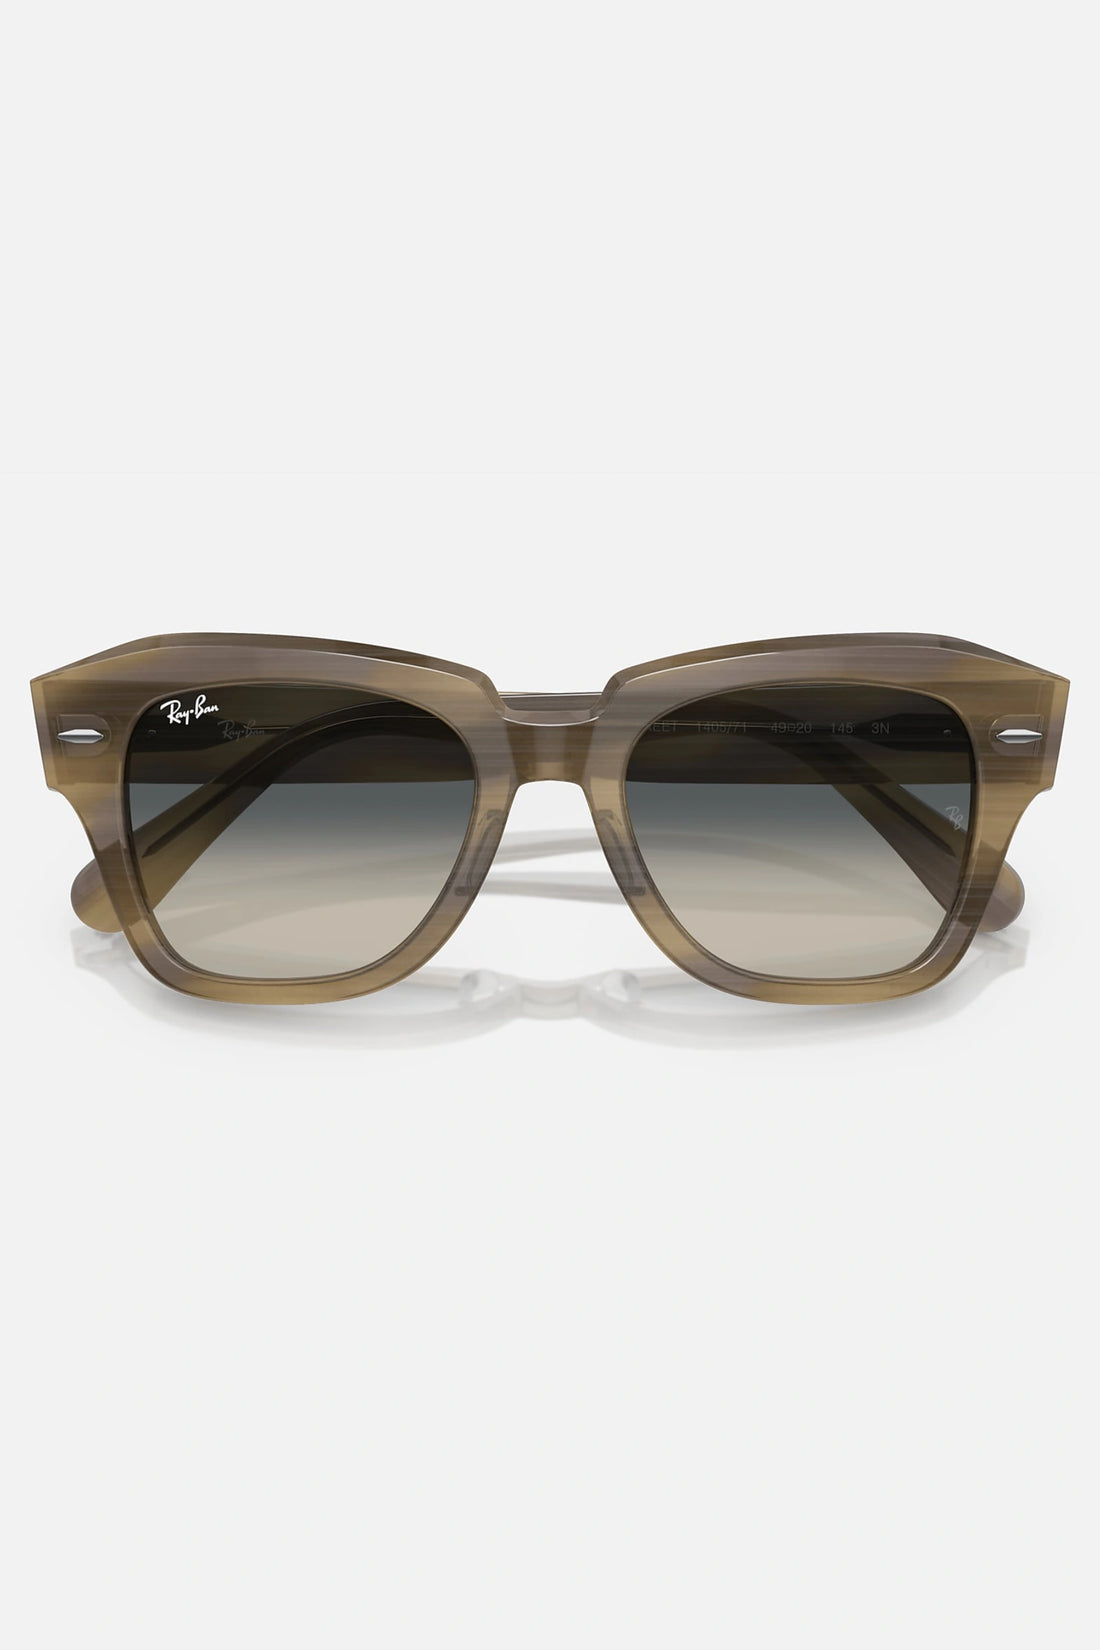 Ray-Ban RB2186 140571 State Street